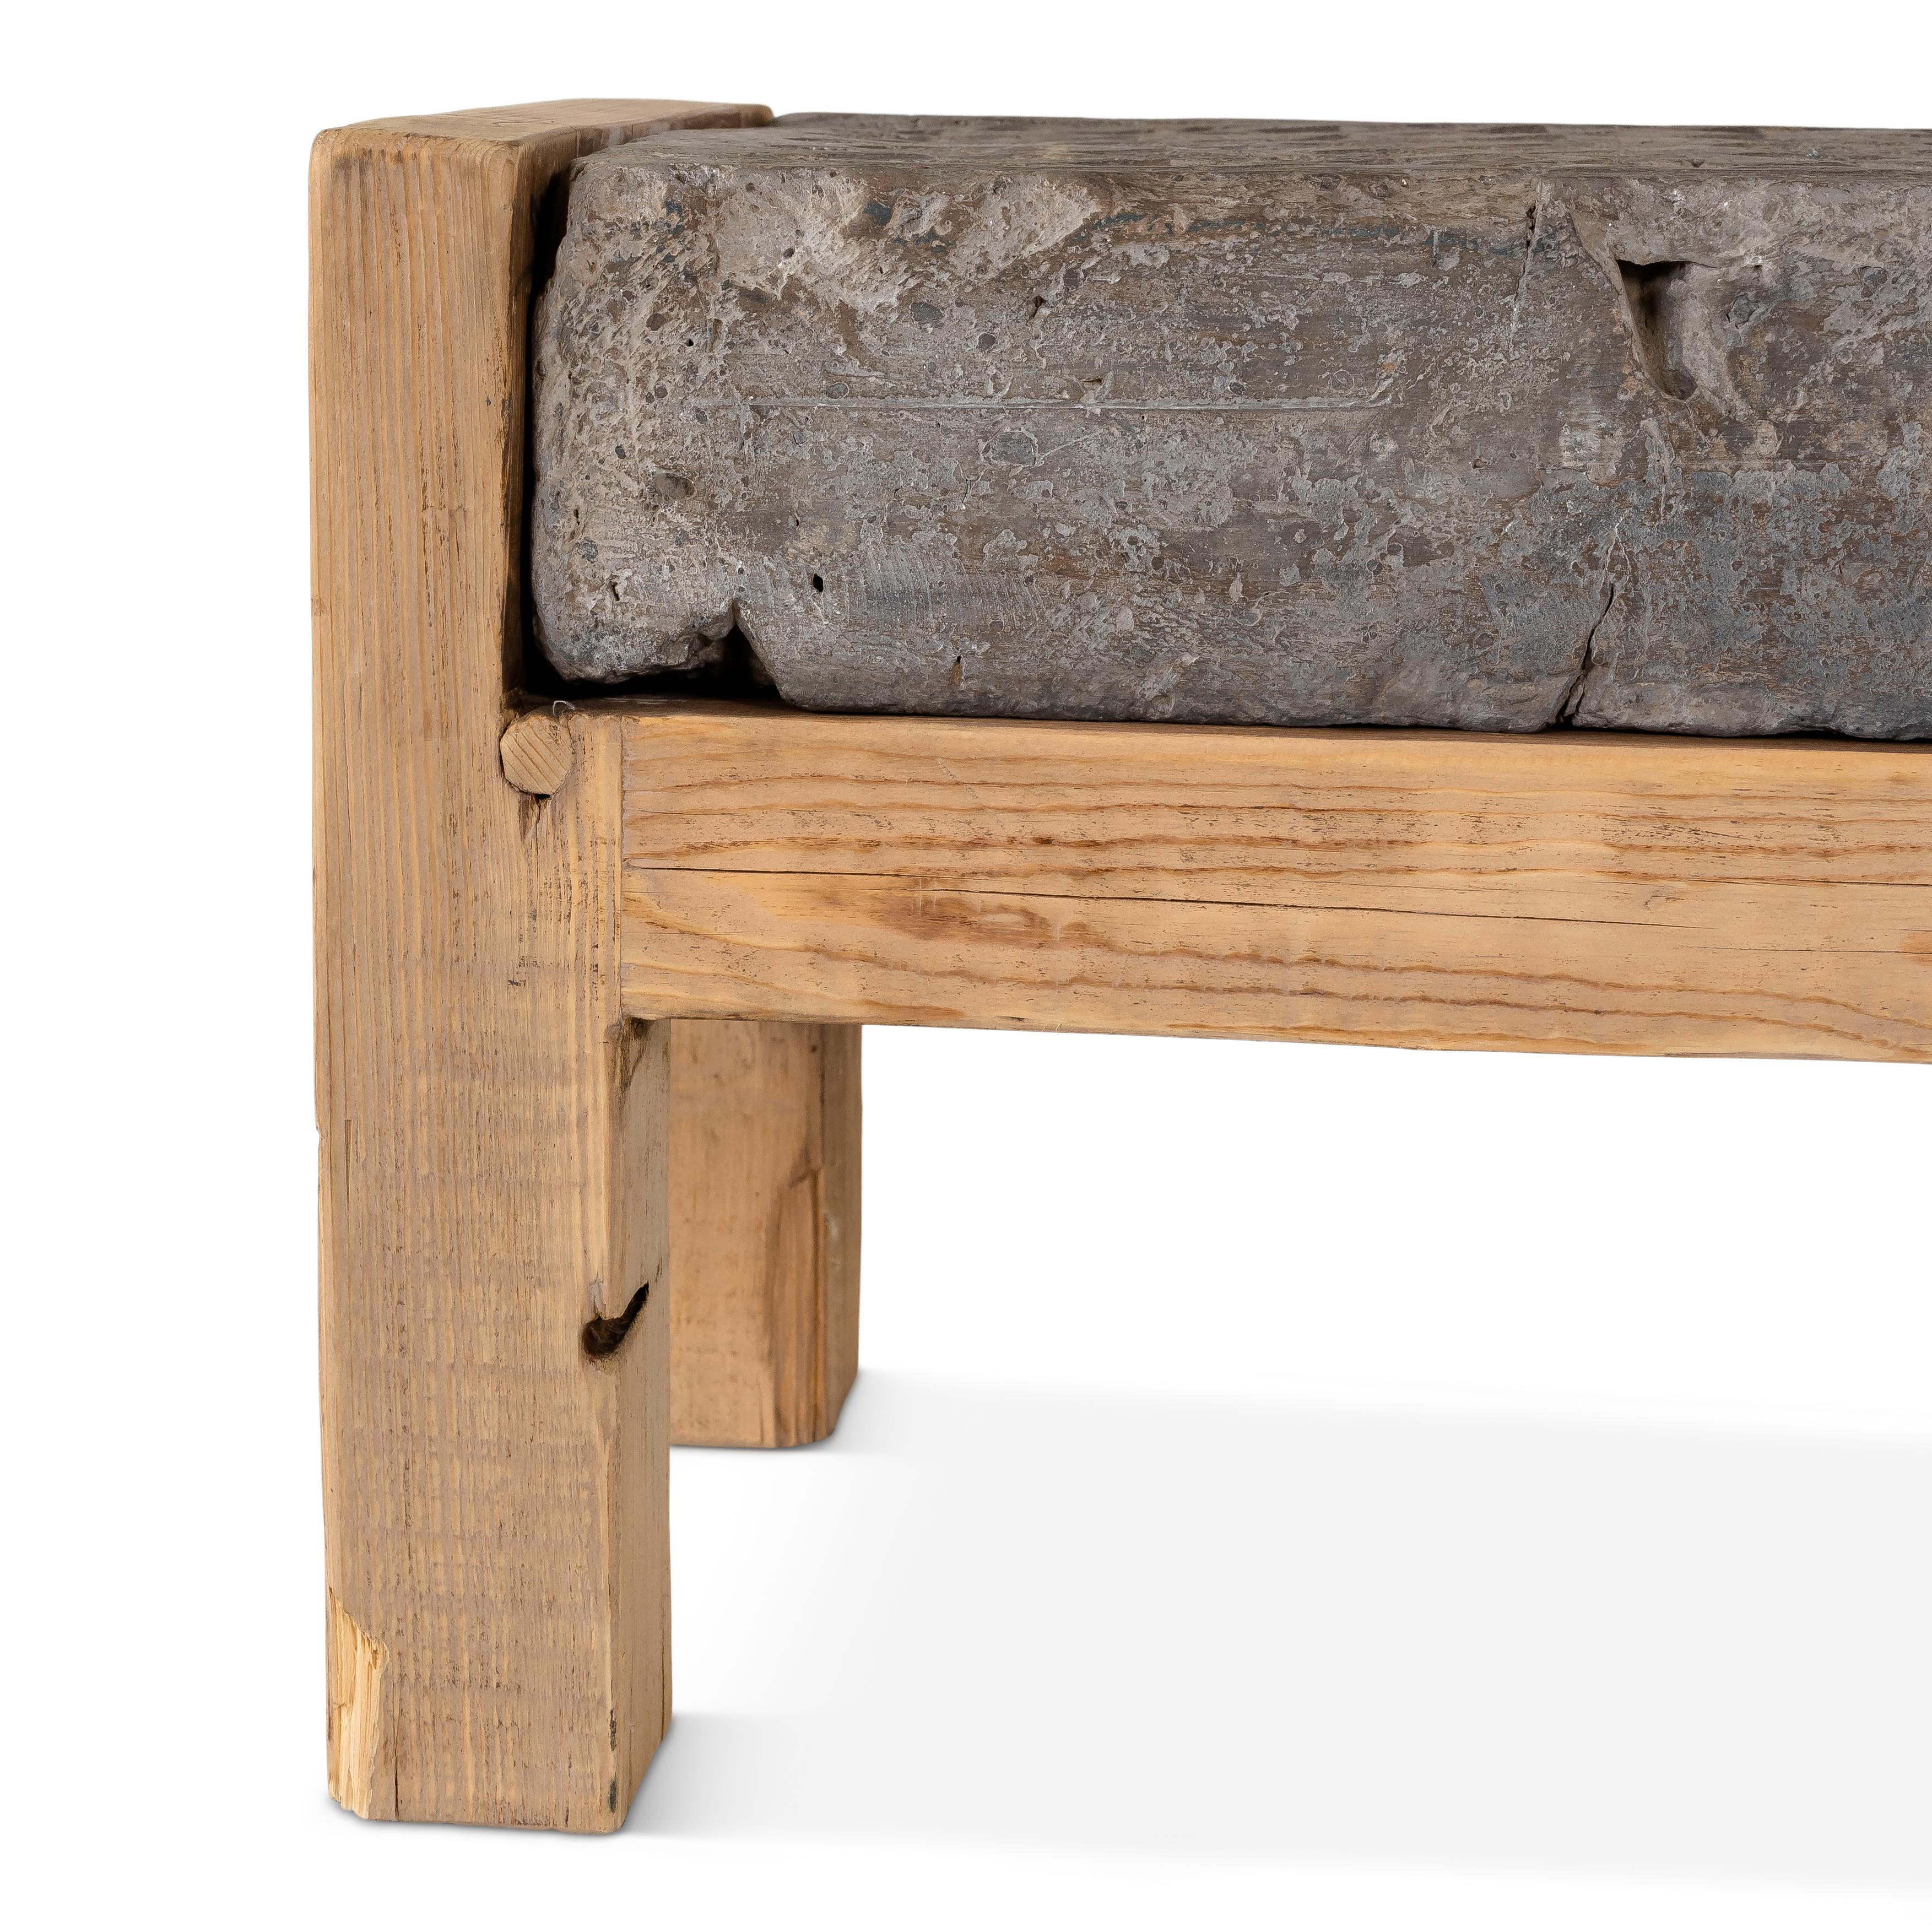 South asian architectural stone inset bench with carved stone detailing.

Piece from our one of a kind collection, Le Monde. Exclusive to Brendan Bass.

Globally curated by Brendan Bass, Le Monde furniture and accessories offer modern